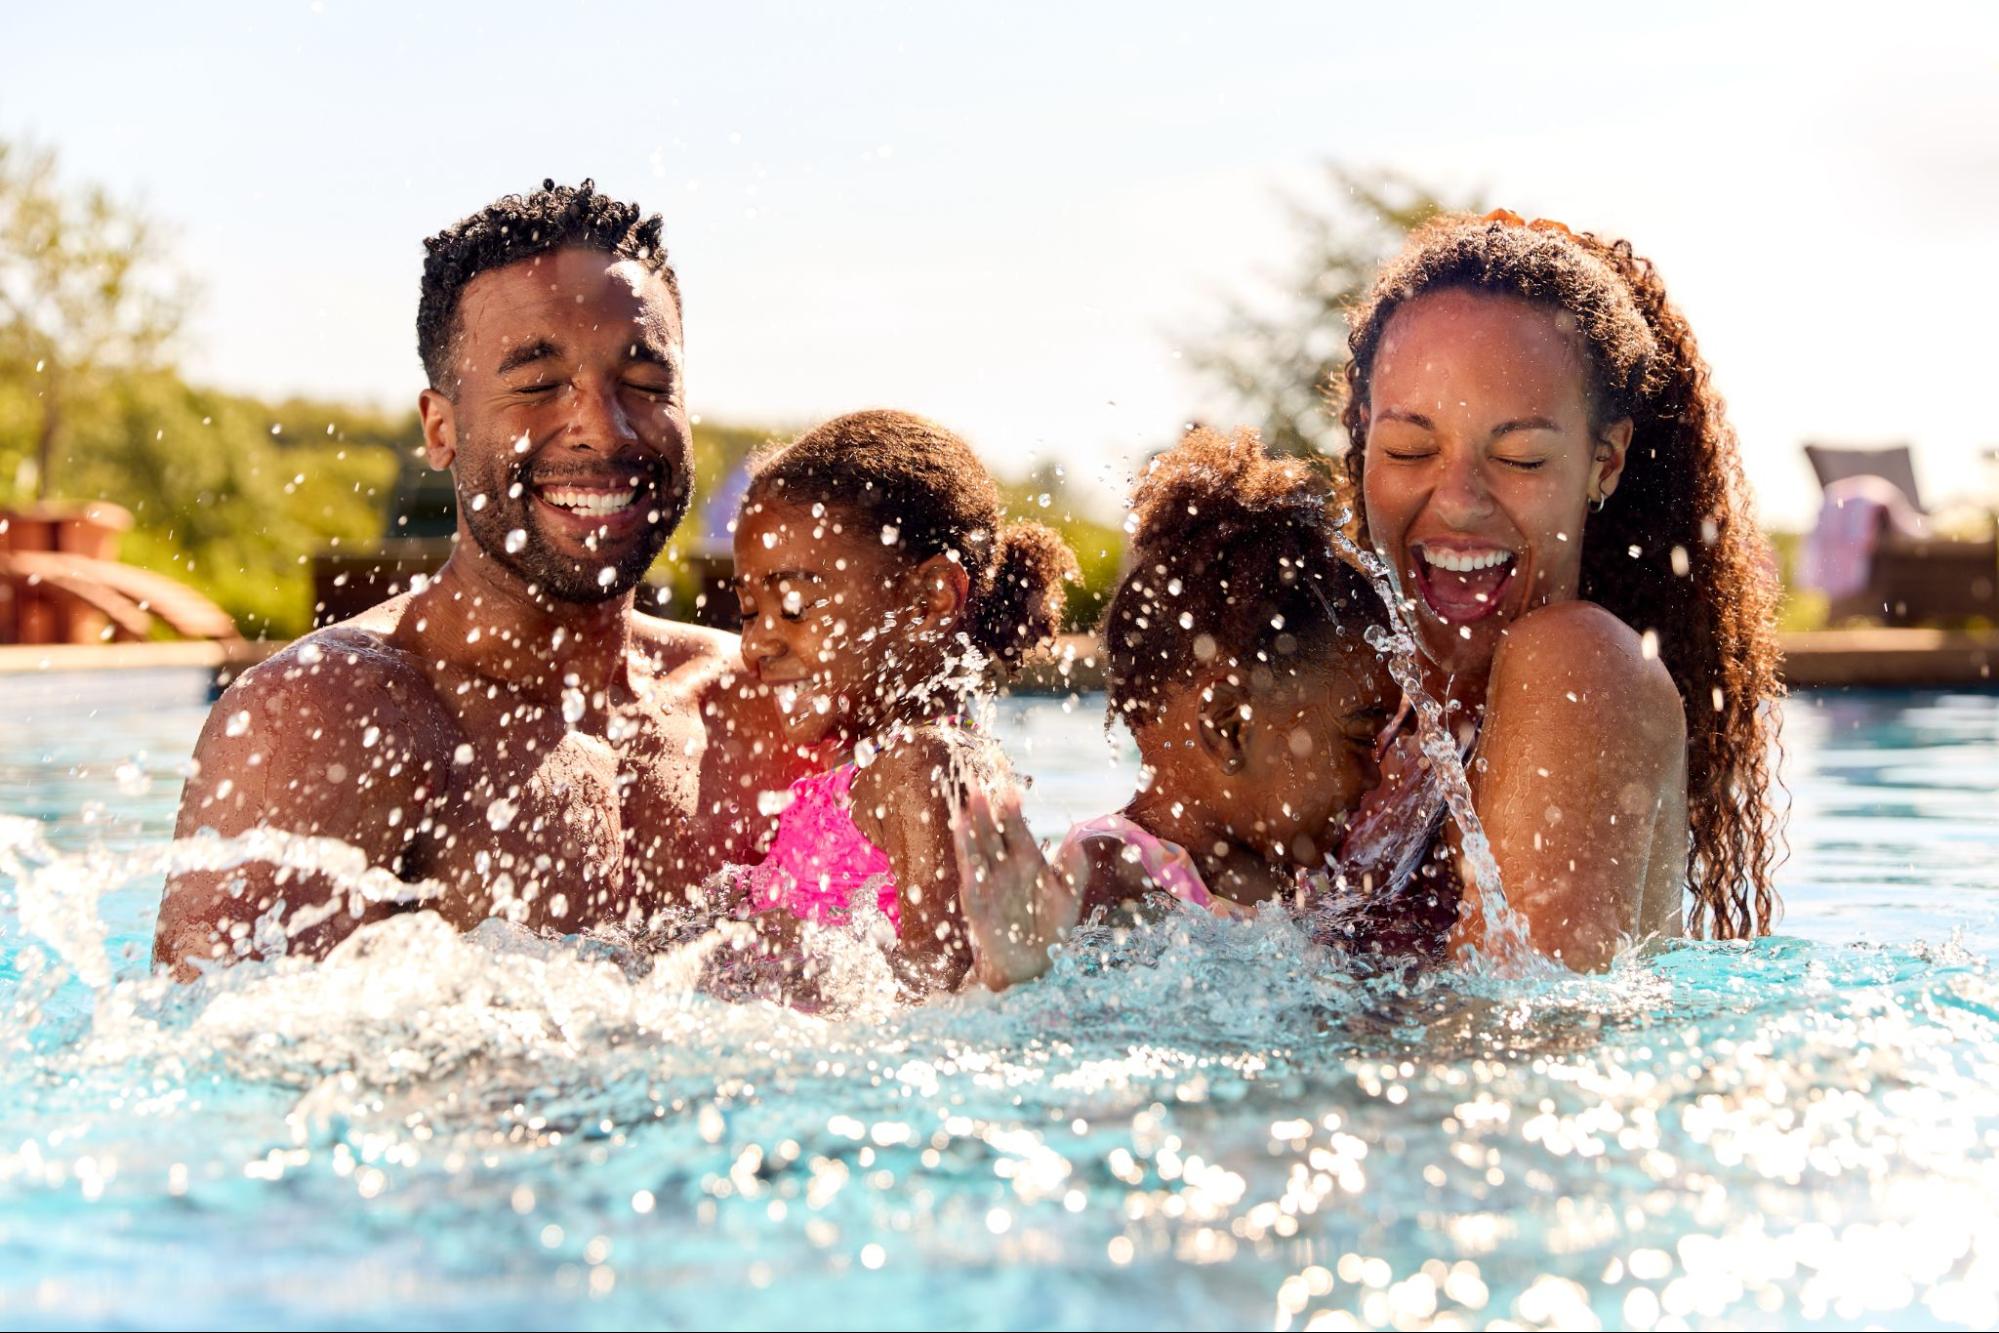 family swimming at a pool in summer ©Monkey Business Images